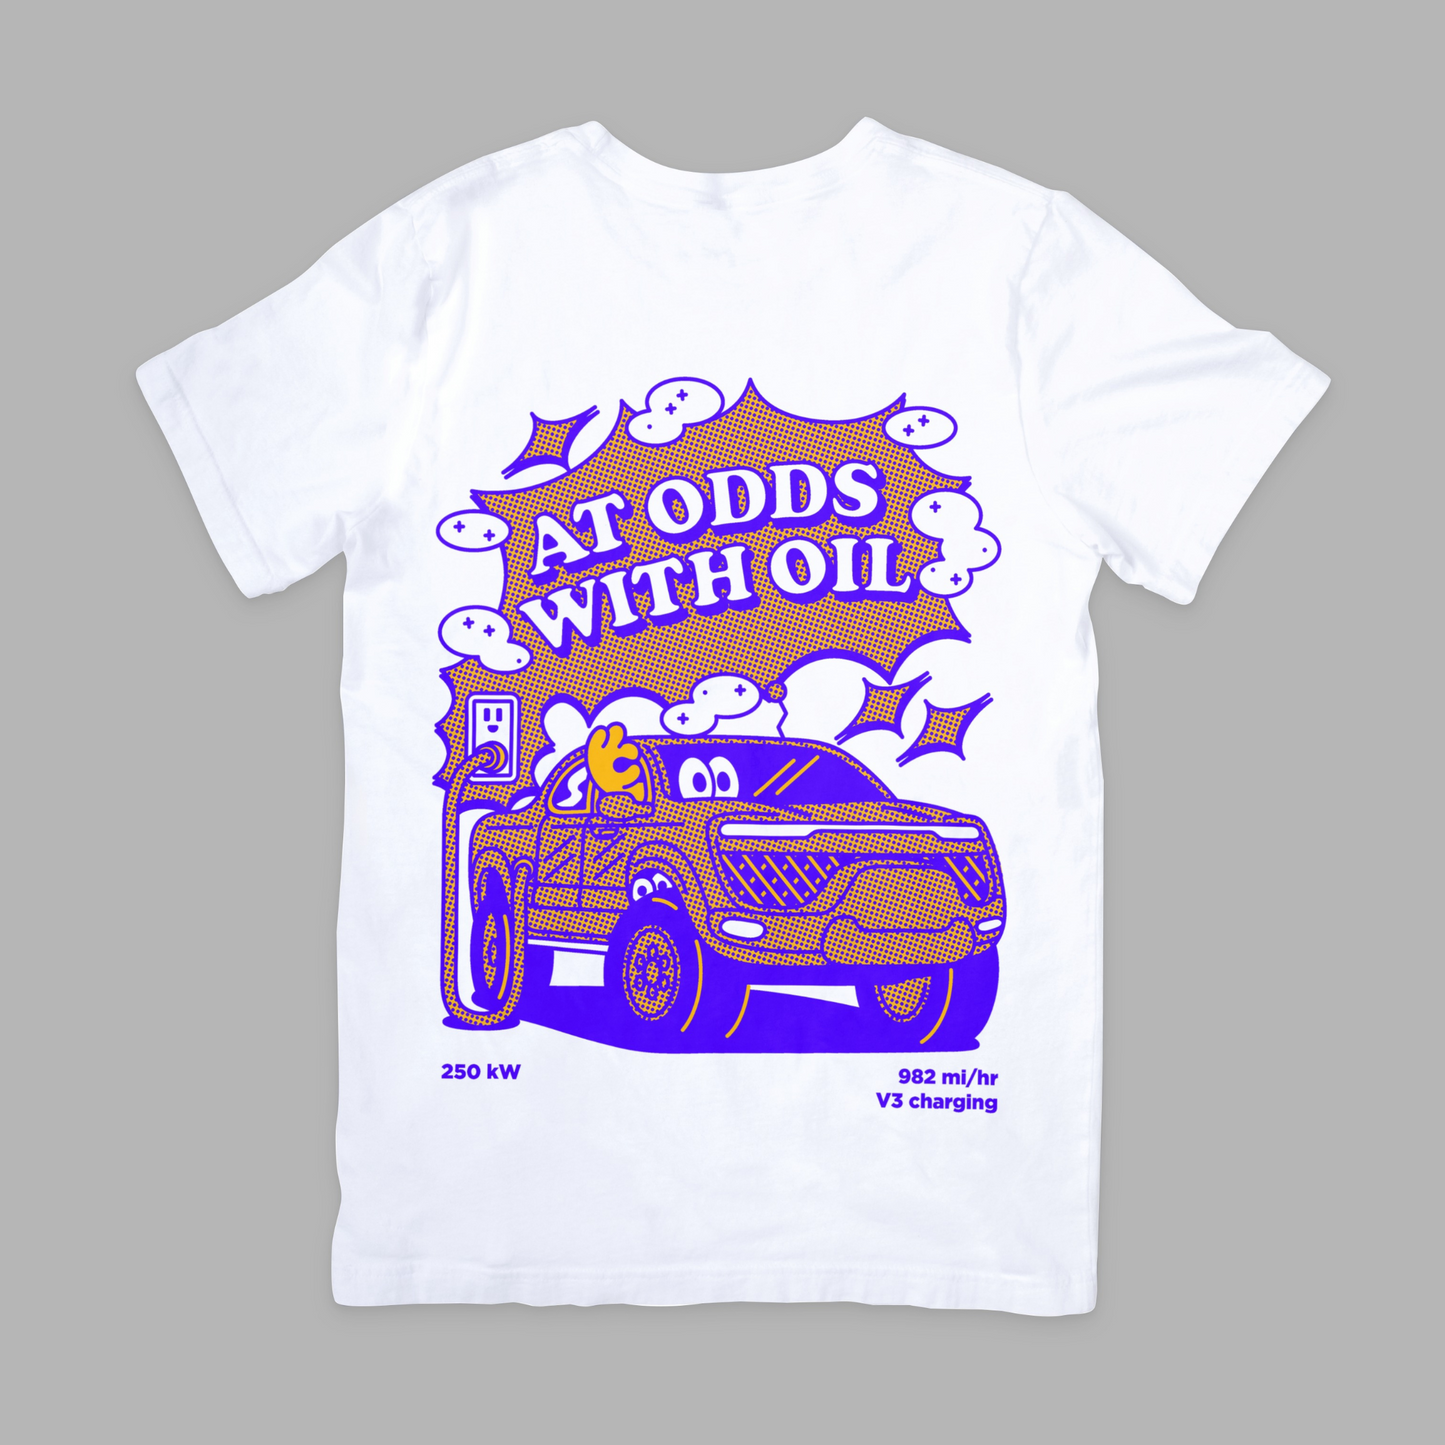 At Odds T-Shirt / Purple & Gold